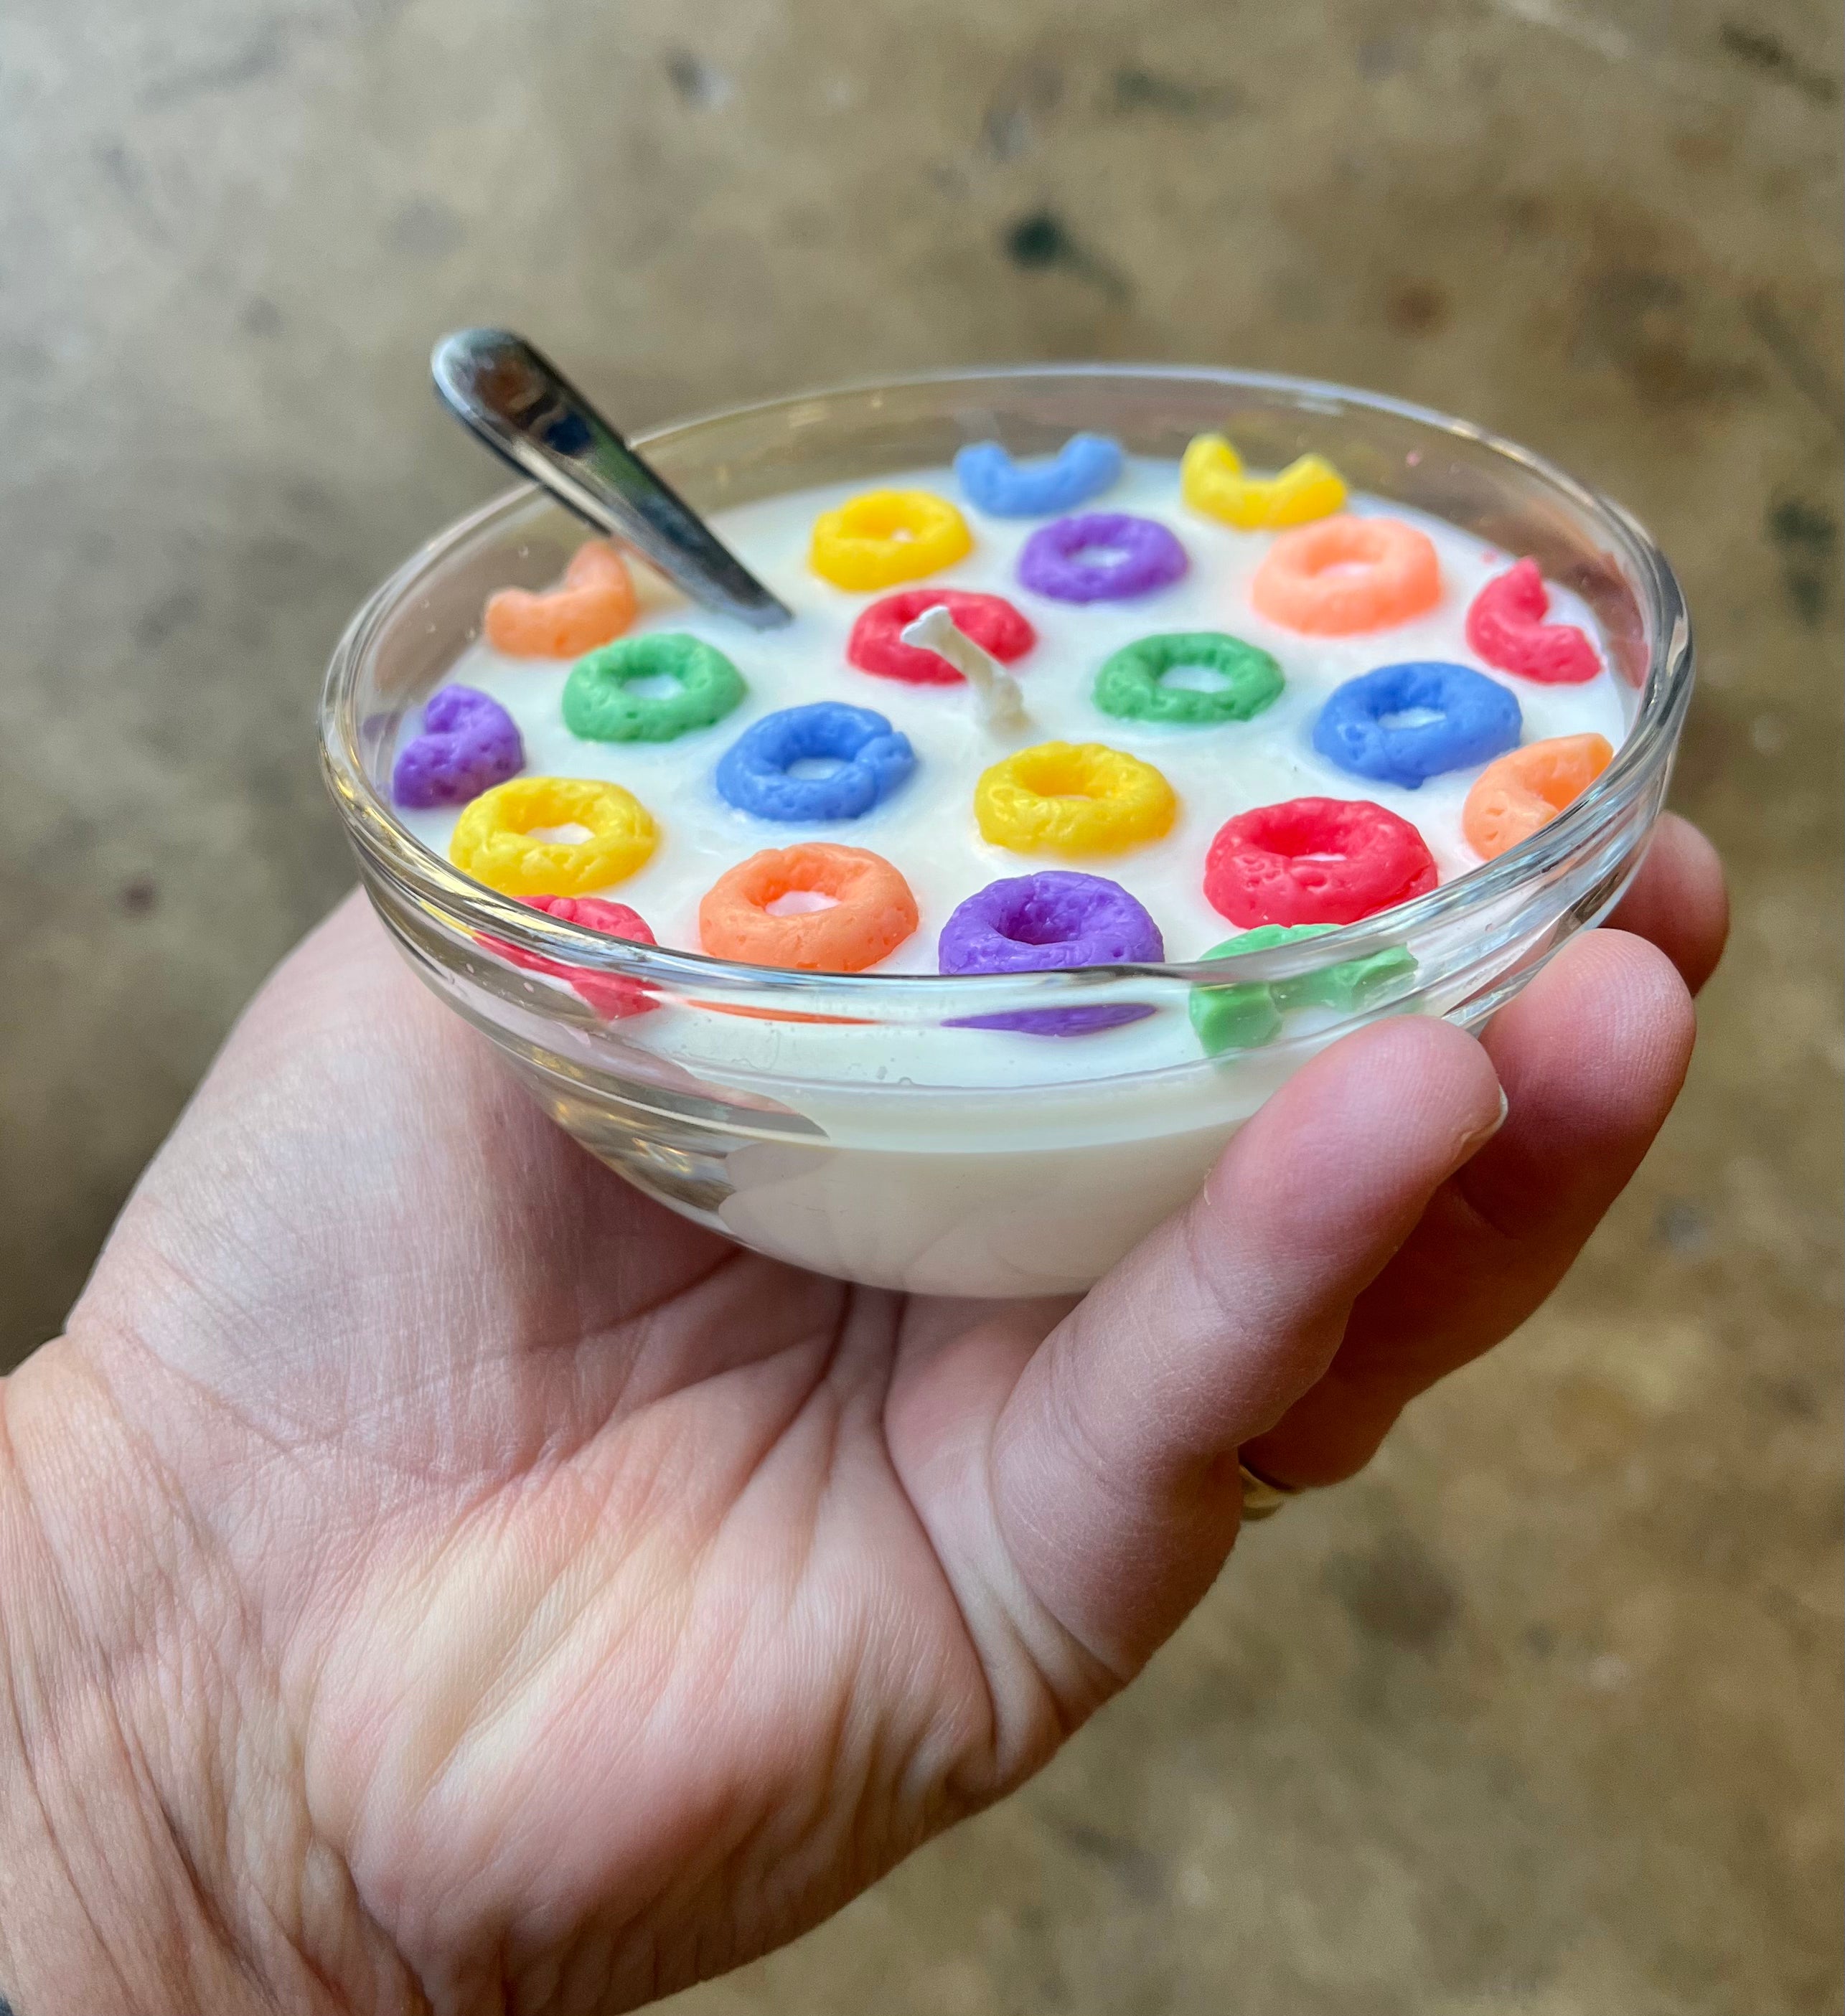 Fruit Loops Products – Candle Box Company